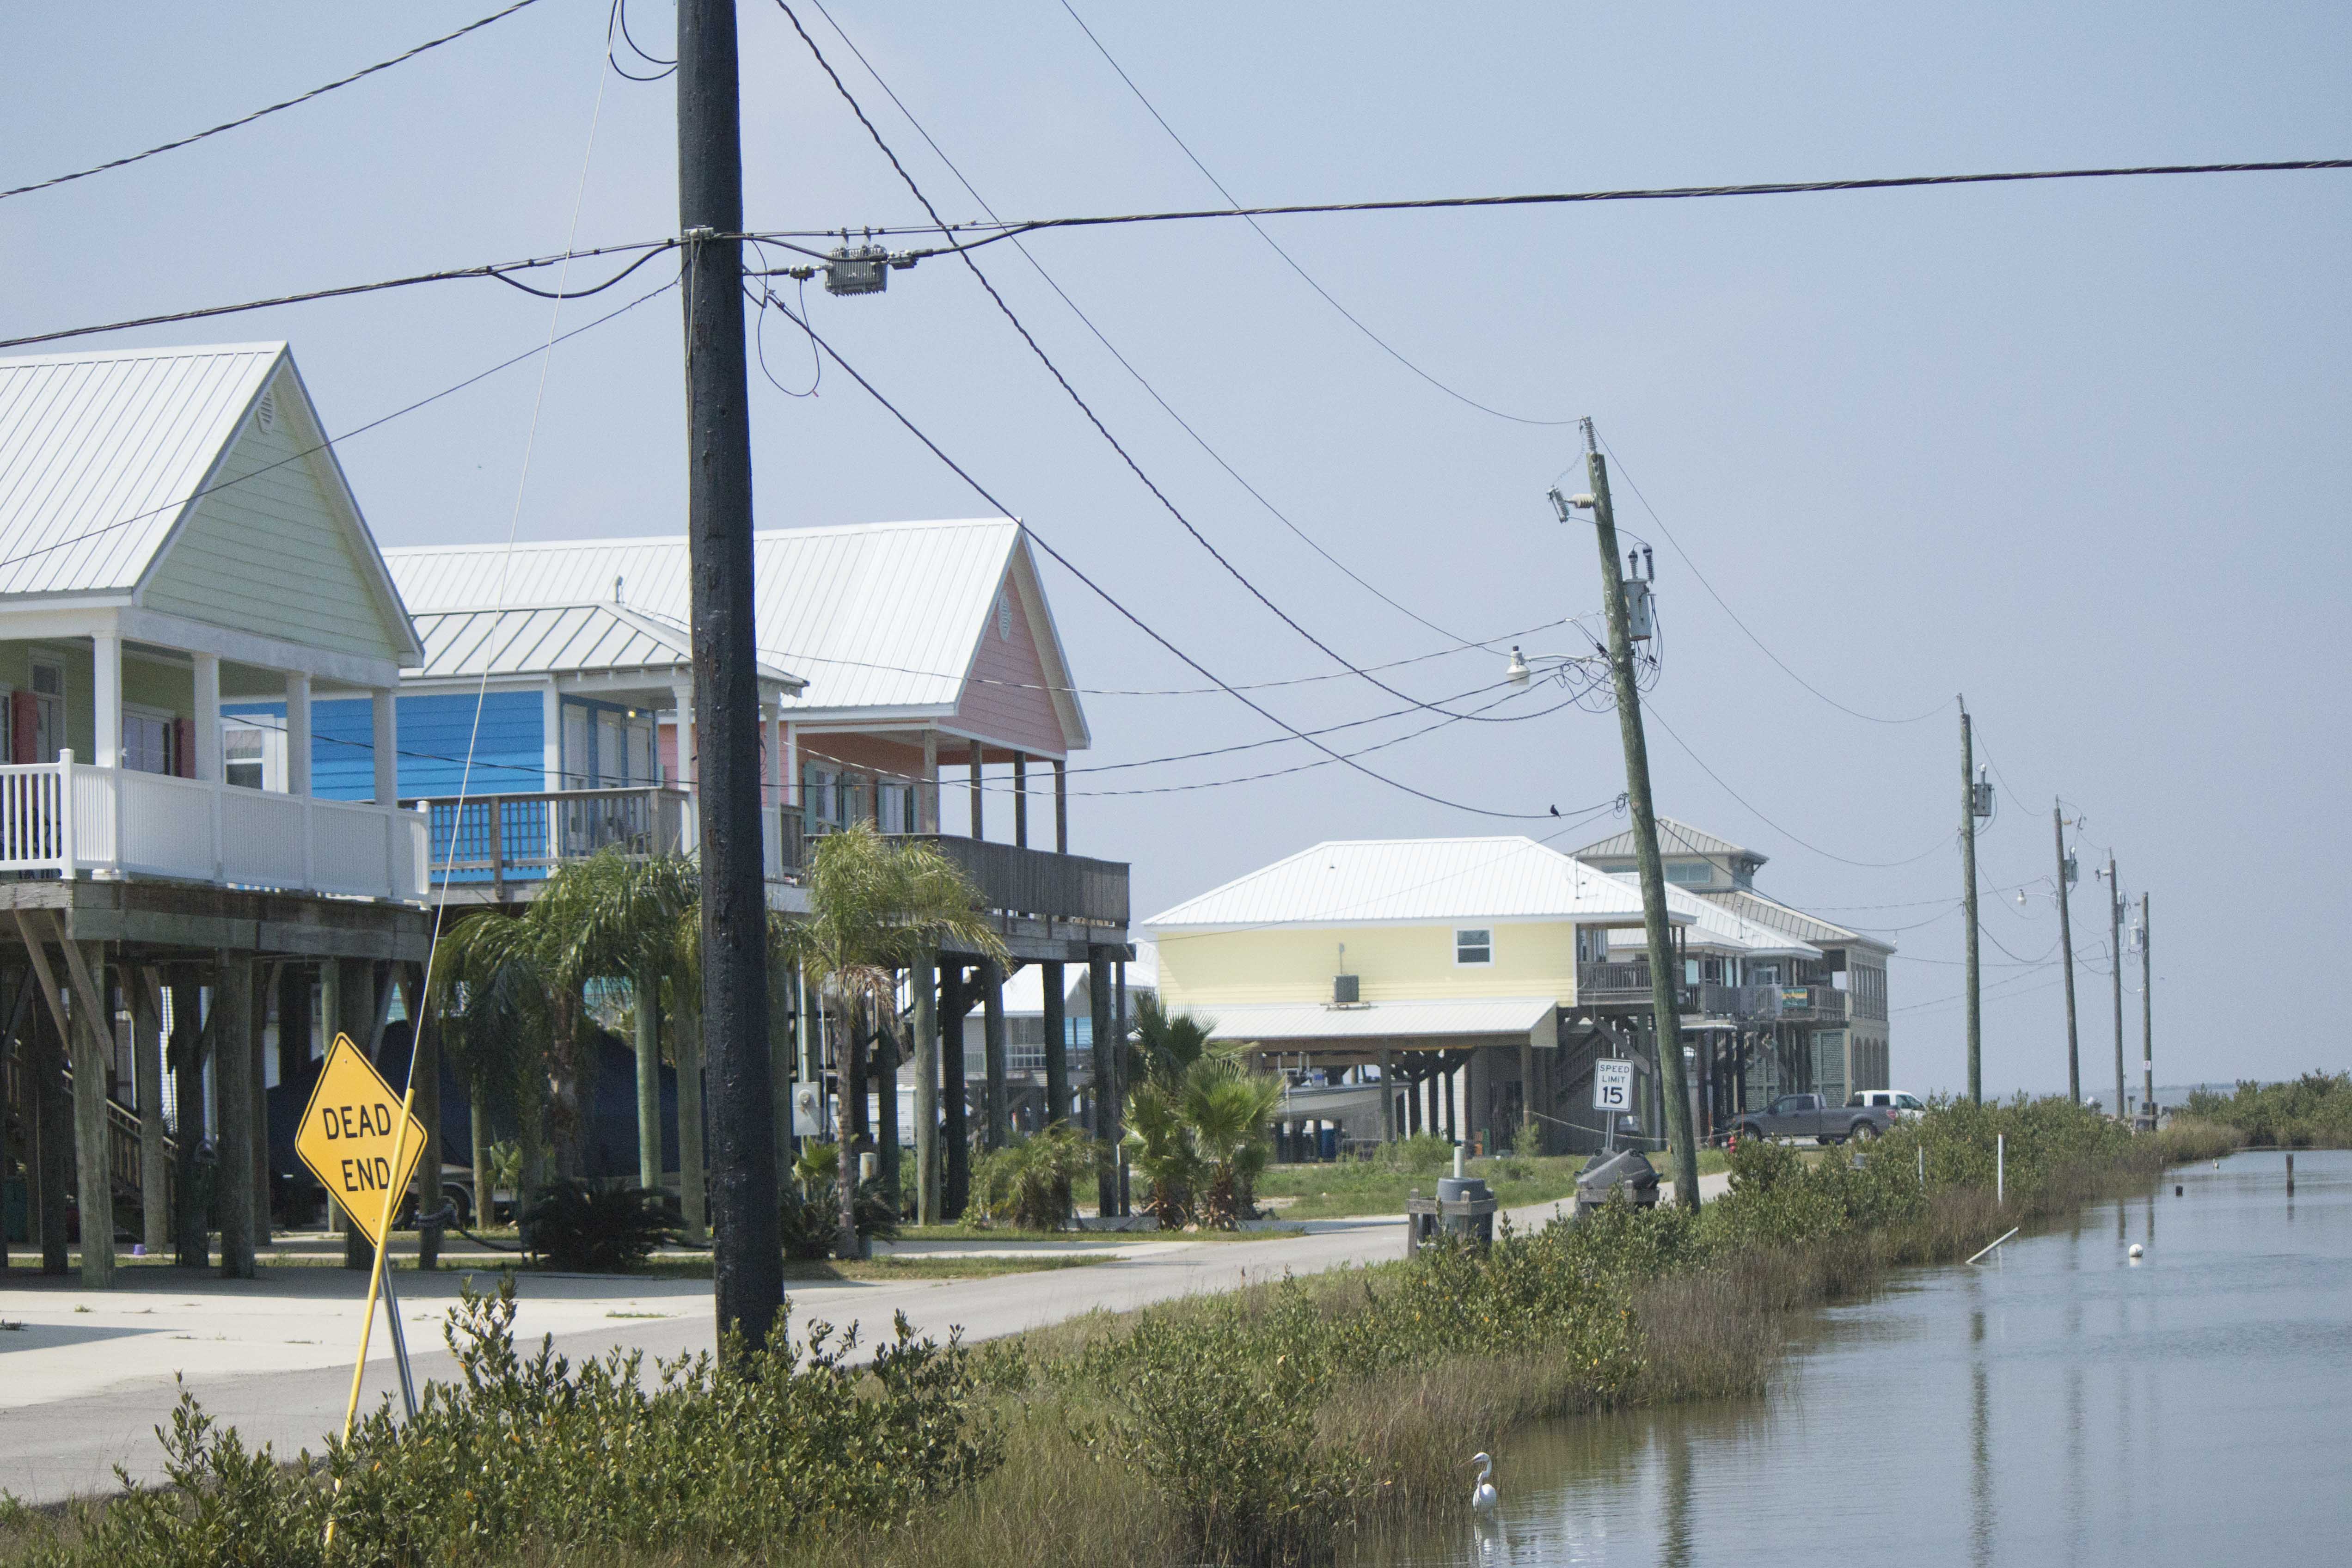 Homes in Grand Isle display stilts that have raised them an entire story off the ground to prevent flooding from coastal storms.  Grand Isle is the only inhabited barrier island on the Louisiana coast, and a destination for vacationers.